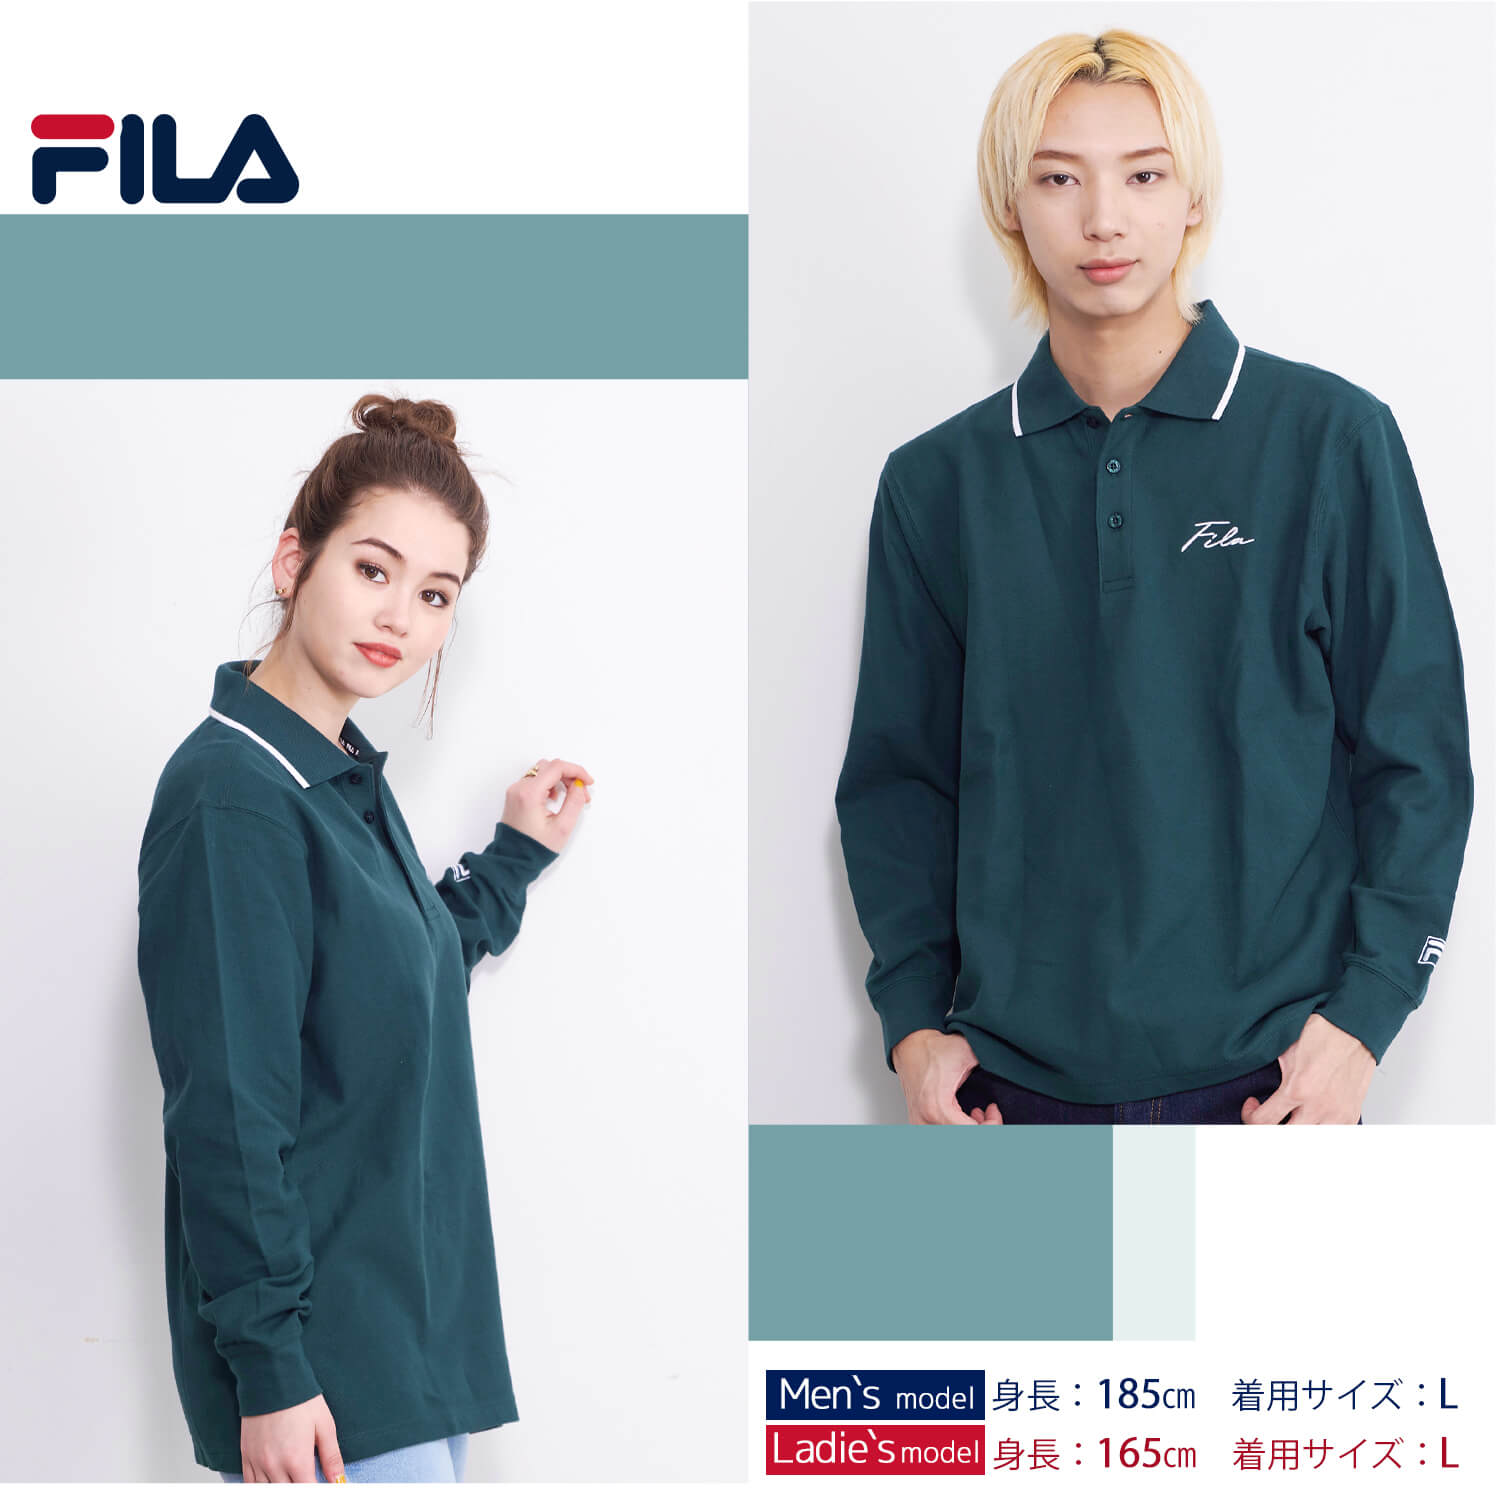 FILA フィラ ポロシャツ 長袖 メンズ 綿 無地 鹿の子 大きいサイズ 4L 5L 筆記体ロゴ 刺繍 衿ライン karlas｜outfit-style｜05